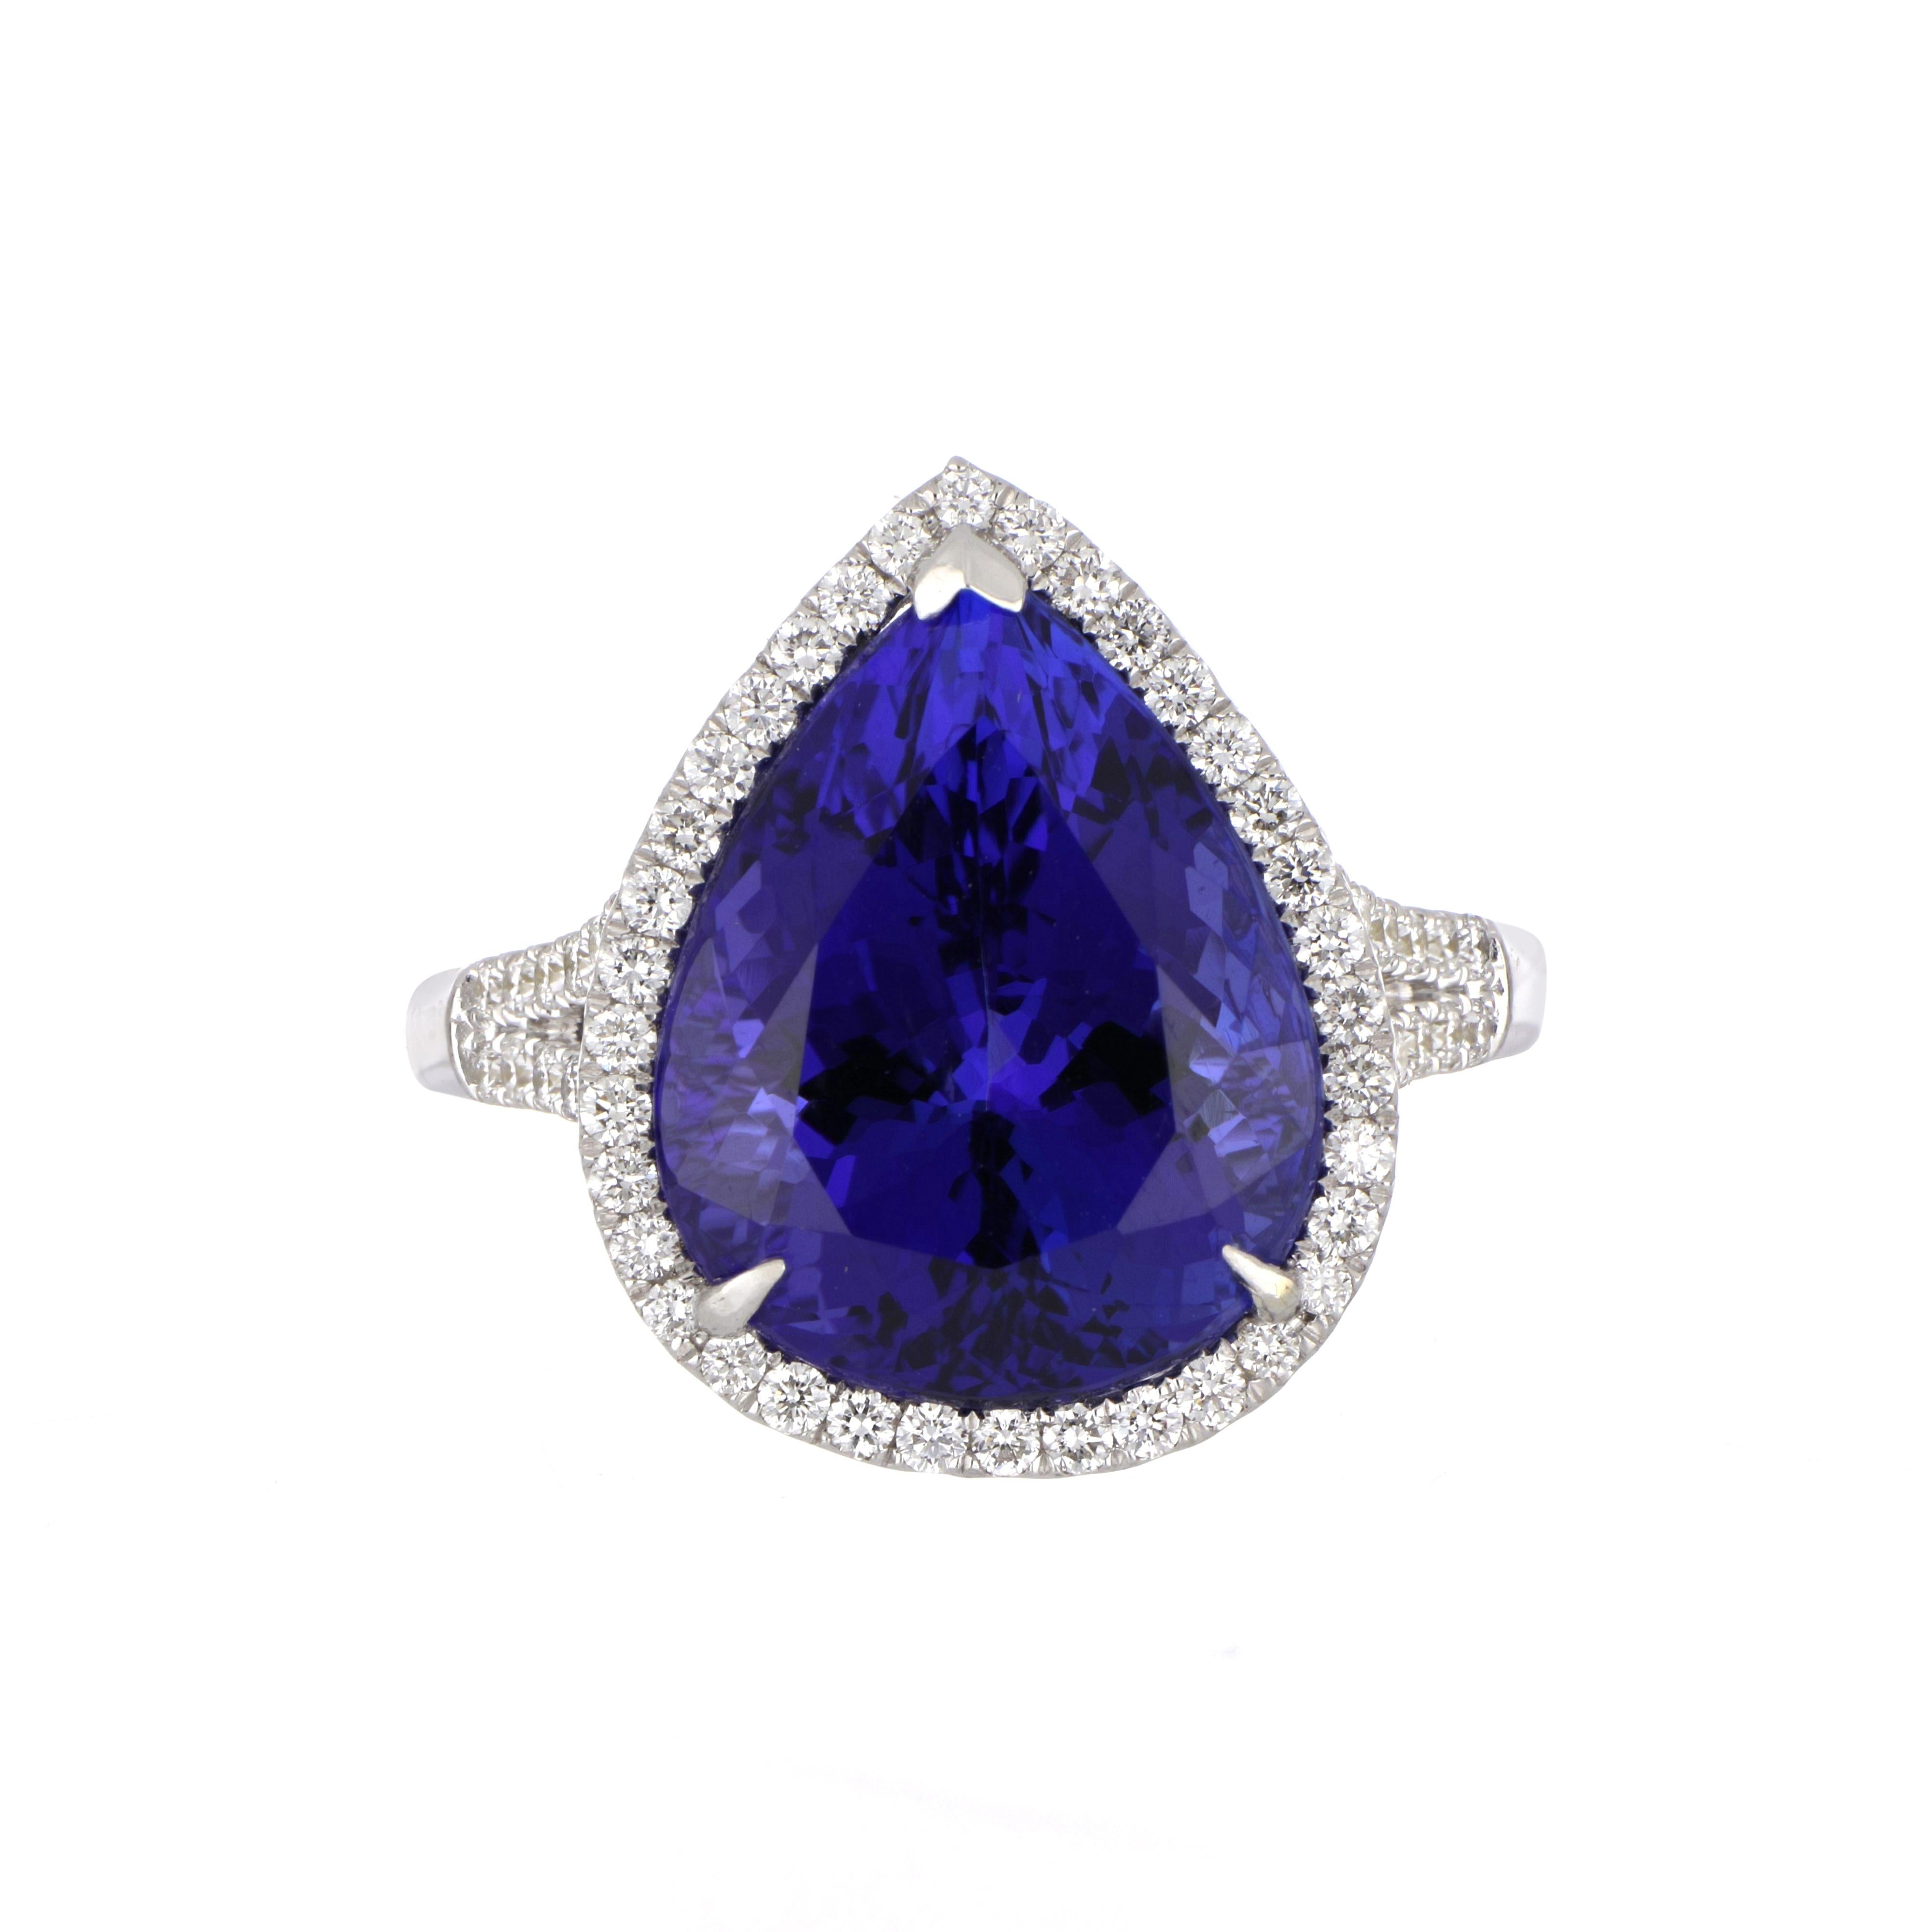 Elegant and exquisitely detailed Gold Ring, centre set with 11.53 Ct Tanzanite, surrounded by and enhanced on shank with micro pave Diamonds, weighing approx. 0.54 total carat weight. Beautifully Hand crafted in 18 Karat white Gold.

Stone Size: